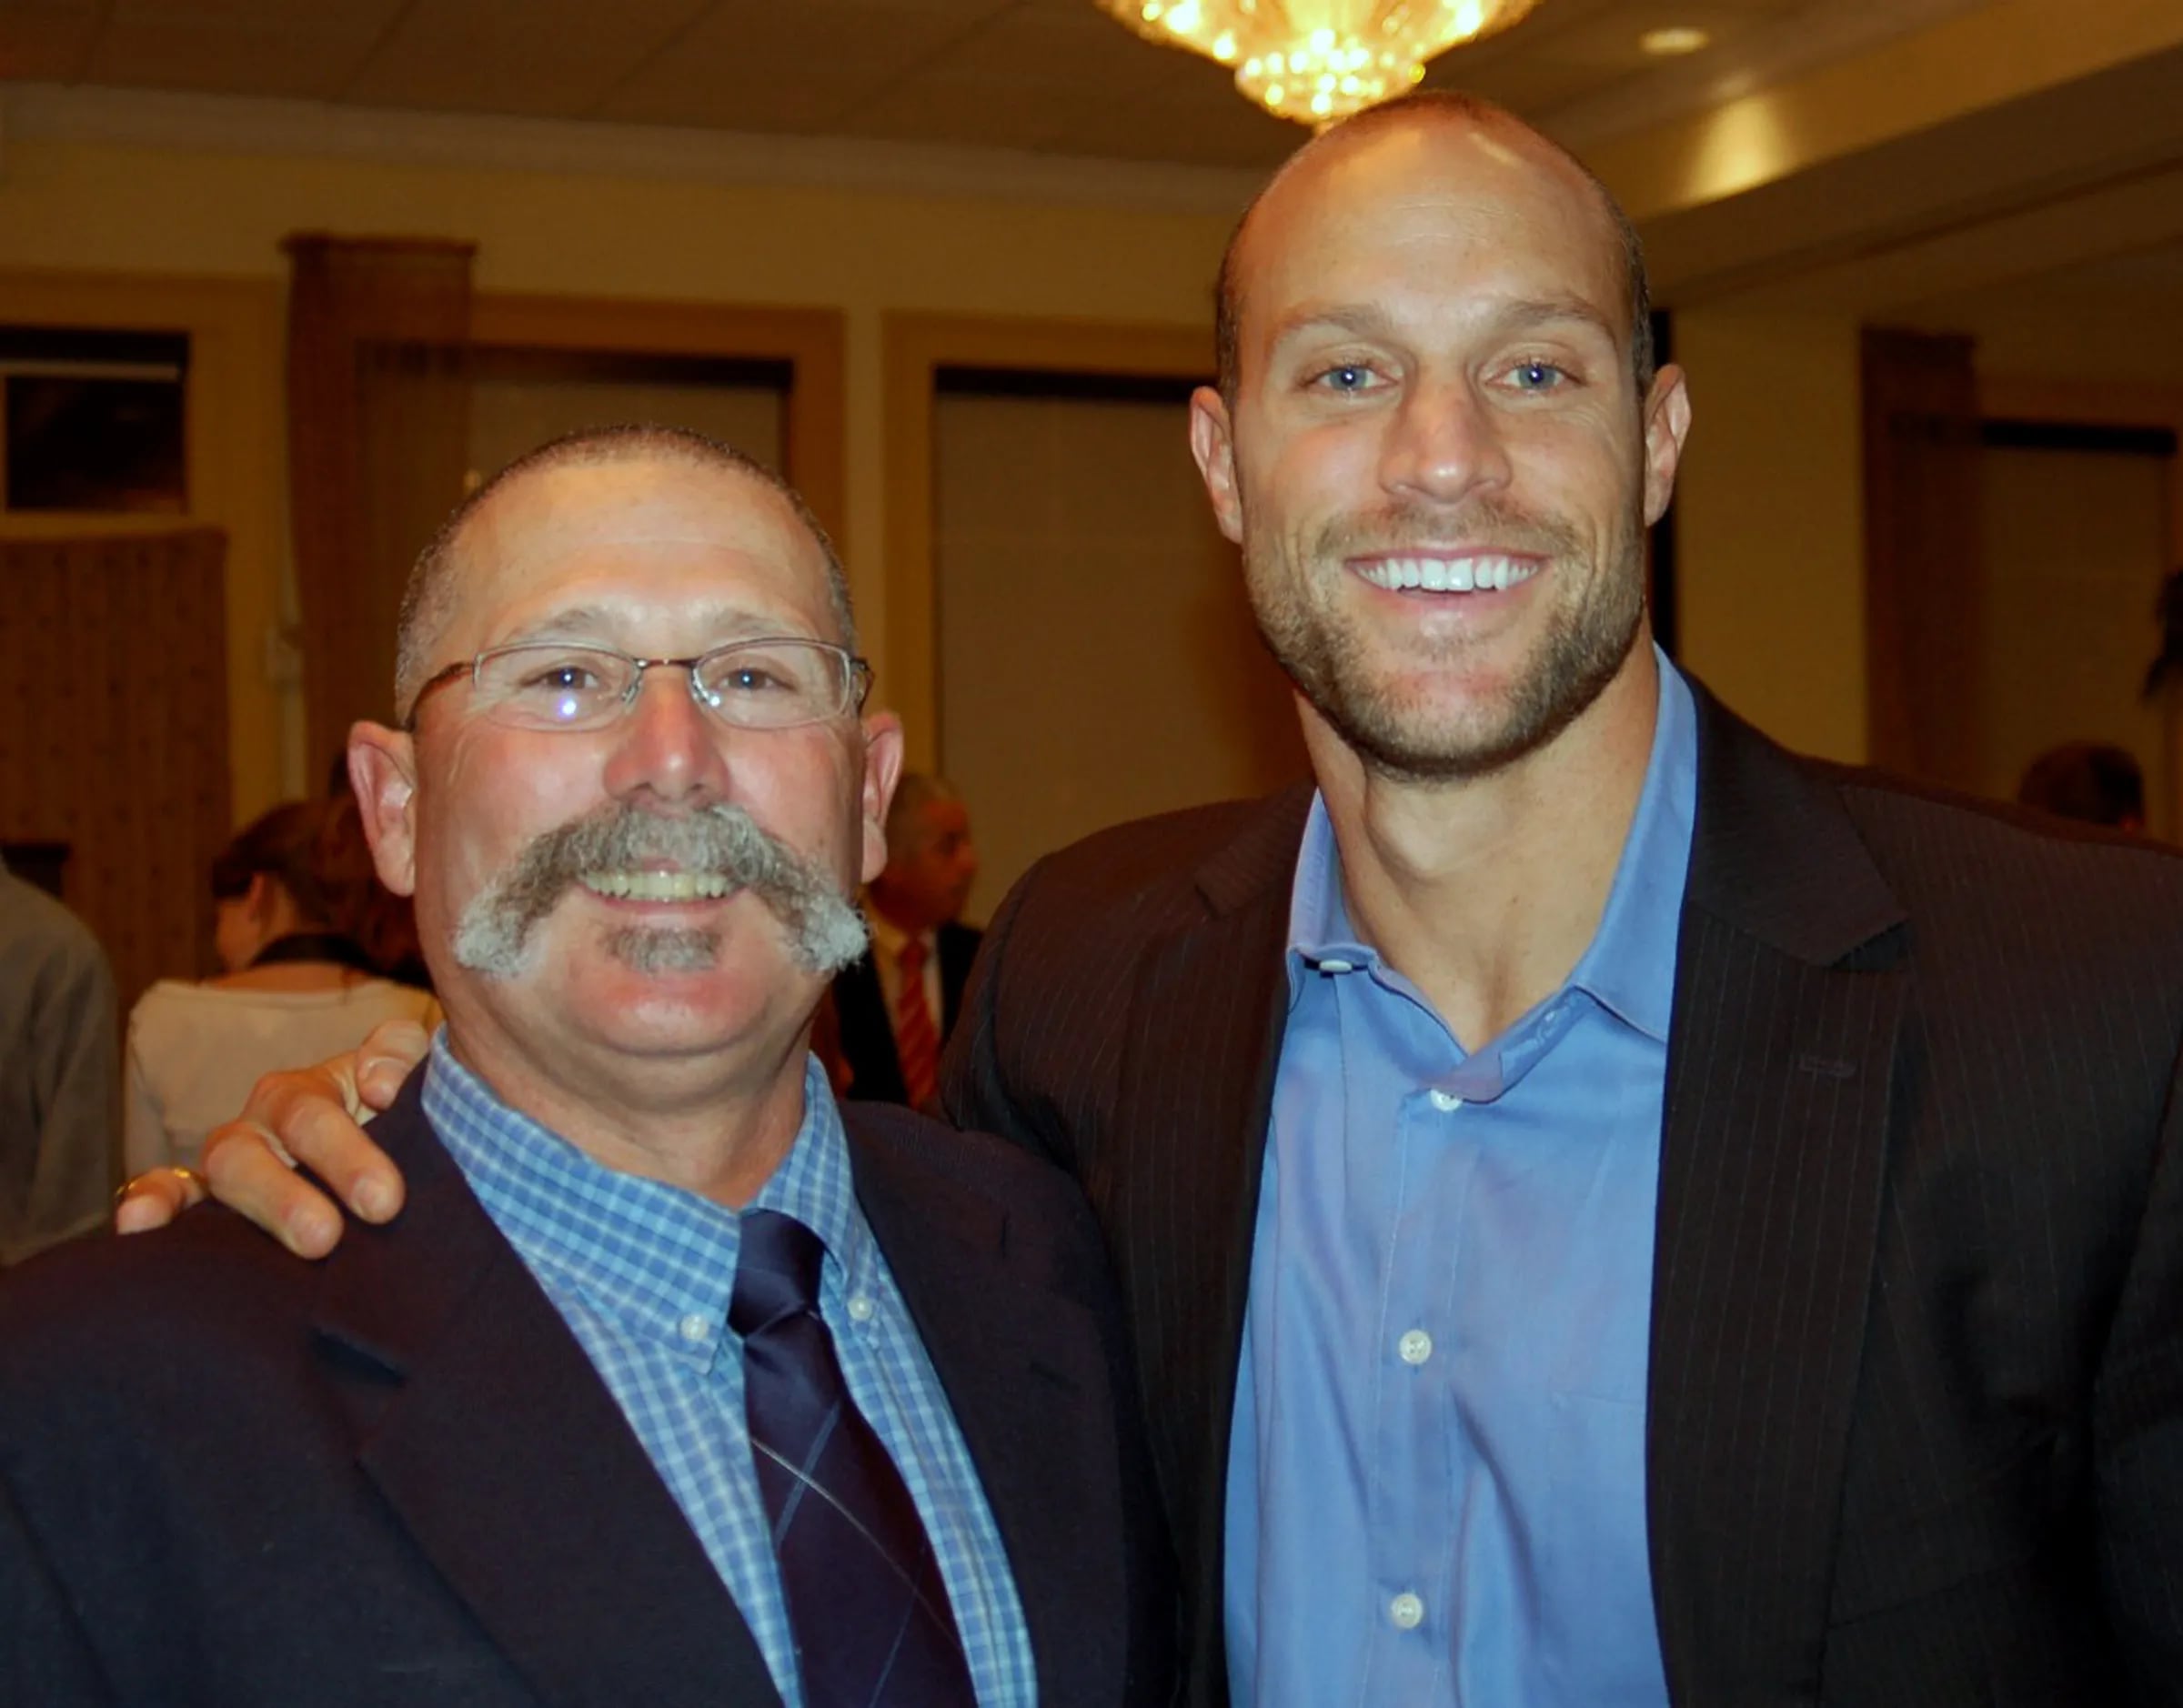 Gabe Kapler's rise: from Earth, Wind & Flour to the big leagues